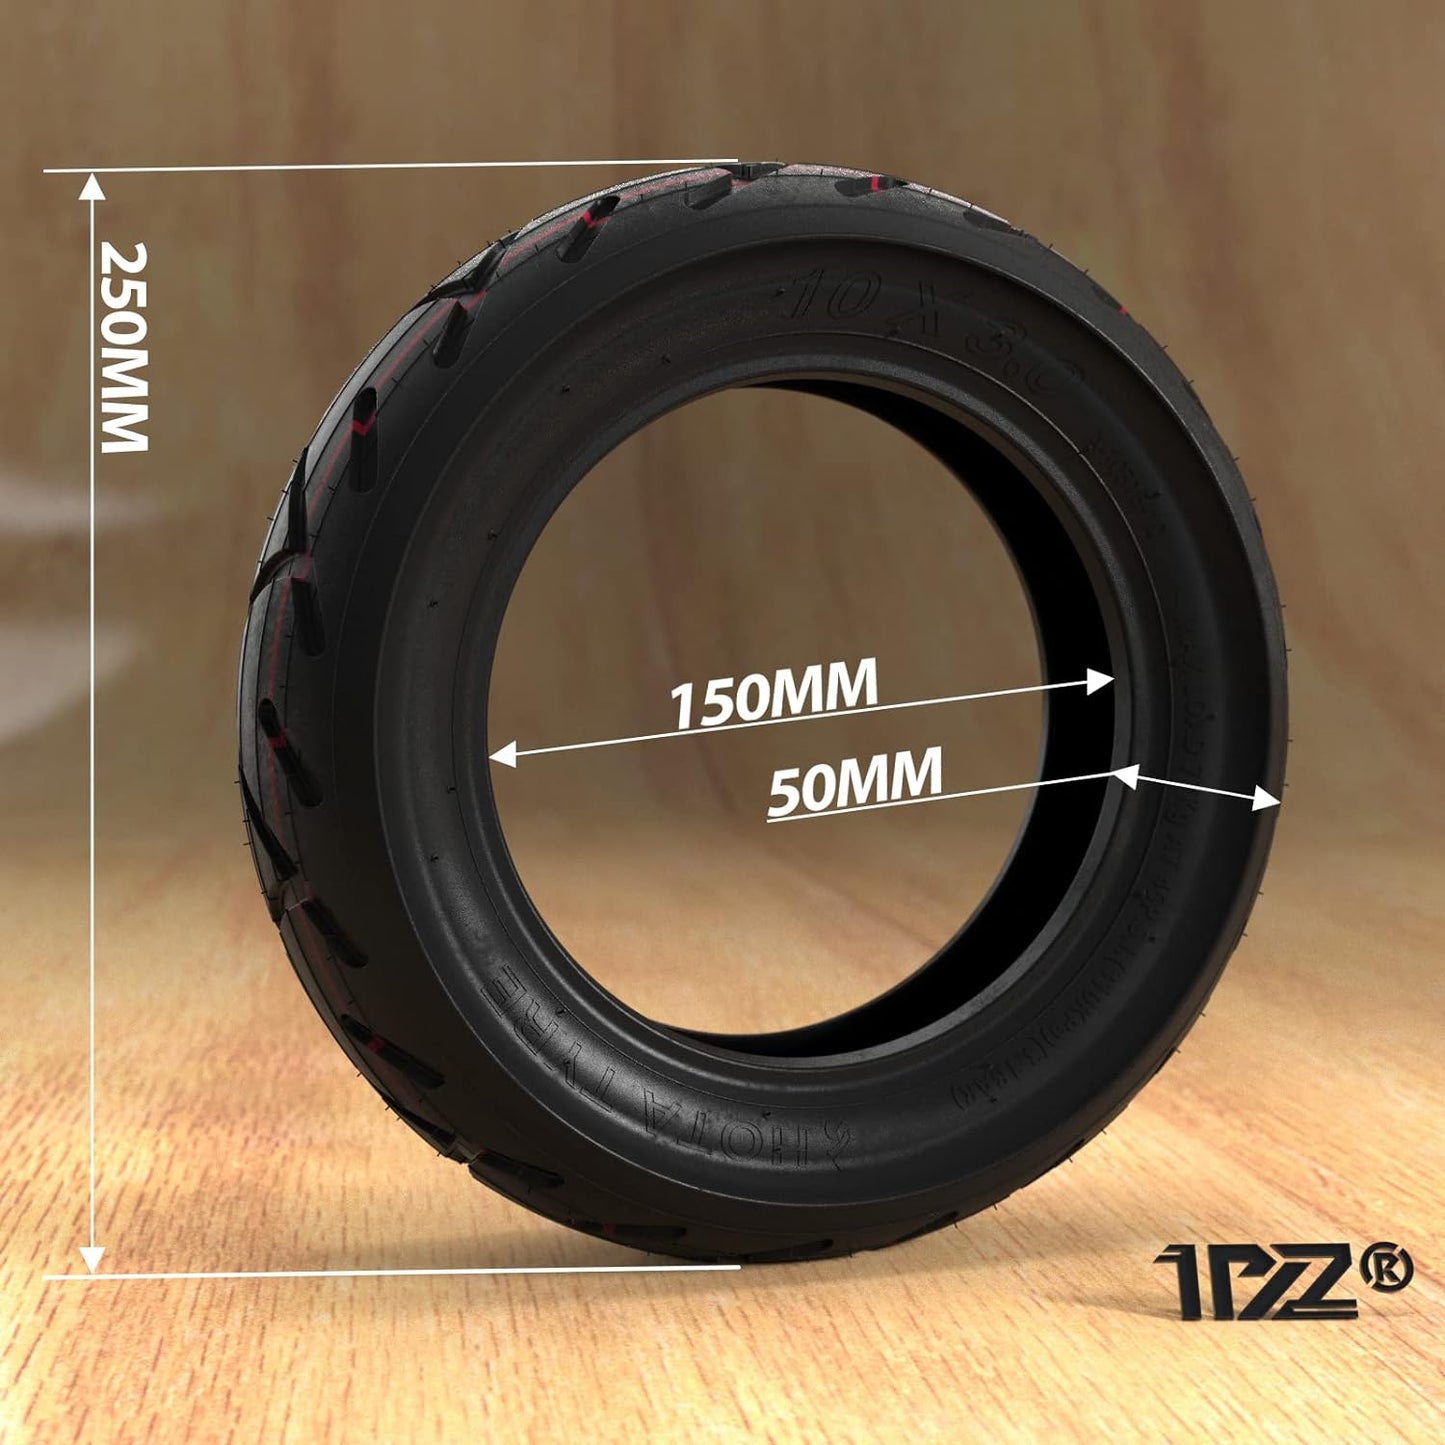 1PZ T10-IN3 10x3.0 255x80 Inner Tube & Tire Set Replacement for Kugoo M4 Pro 10 inch 80/65-6 Electric Scooter